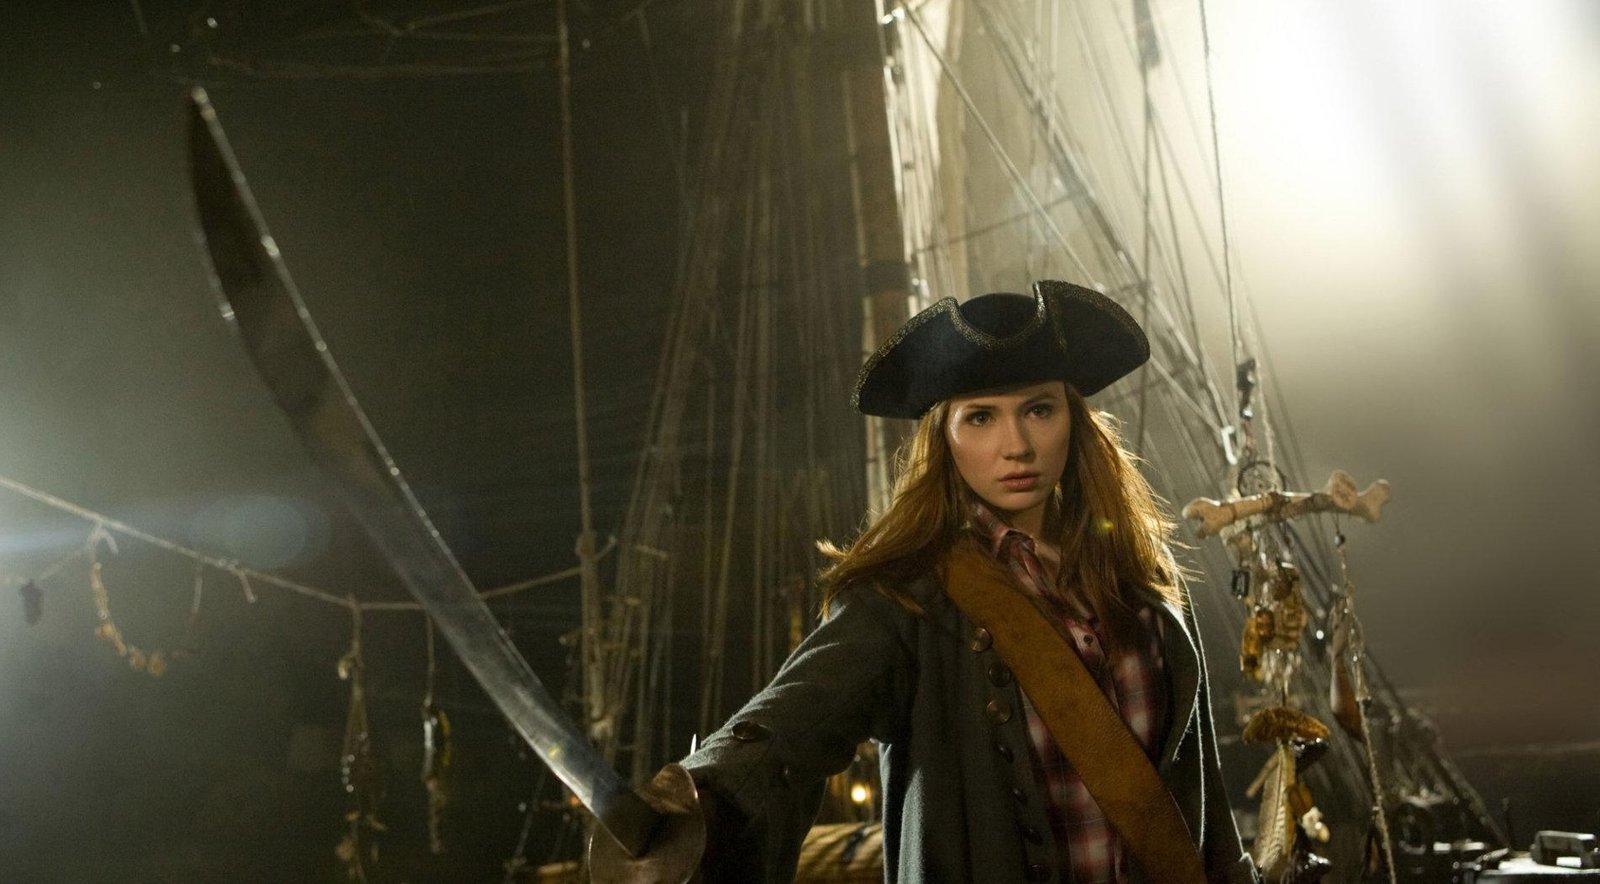 Doctor Who in an Exciting Adventure With… Pirates?